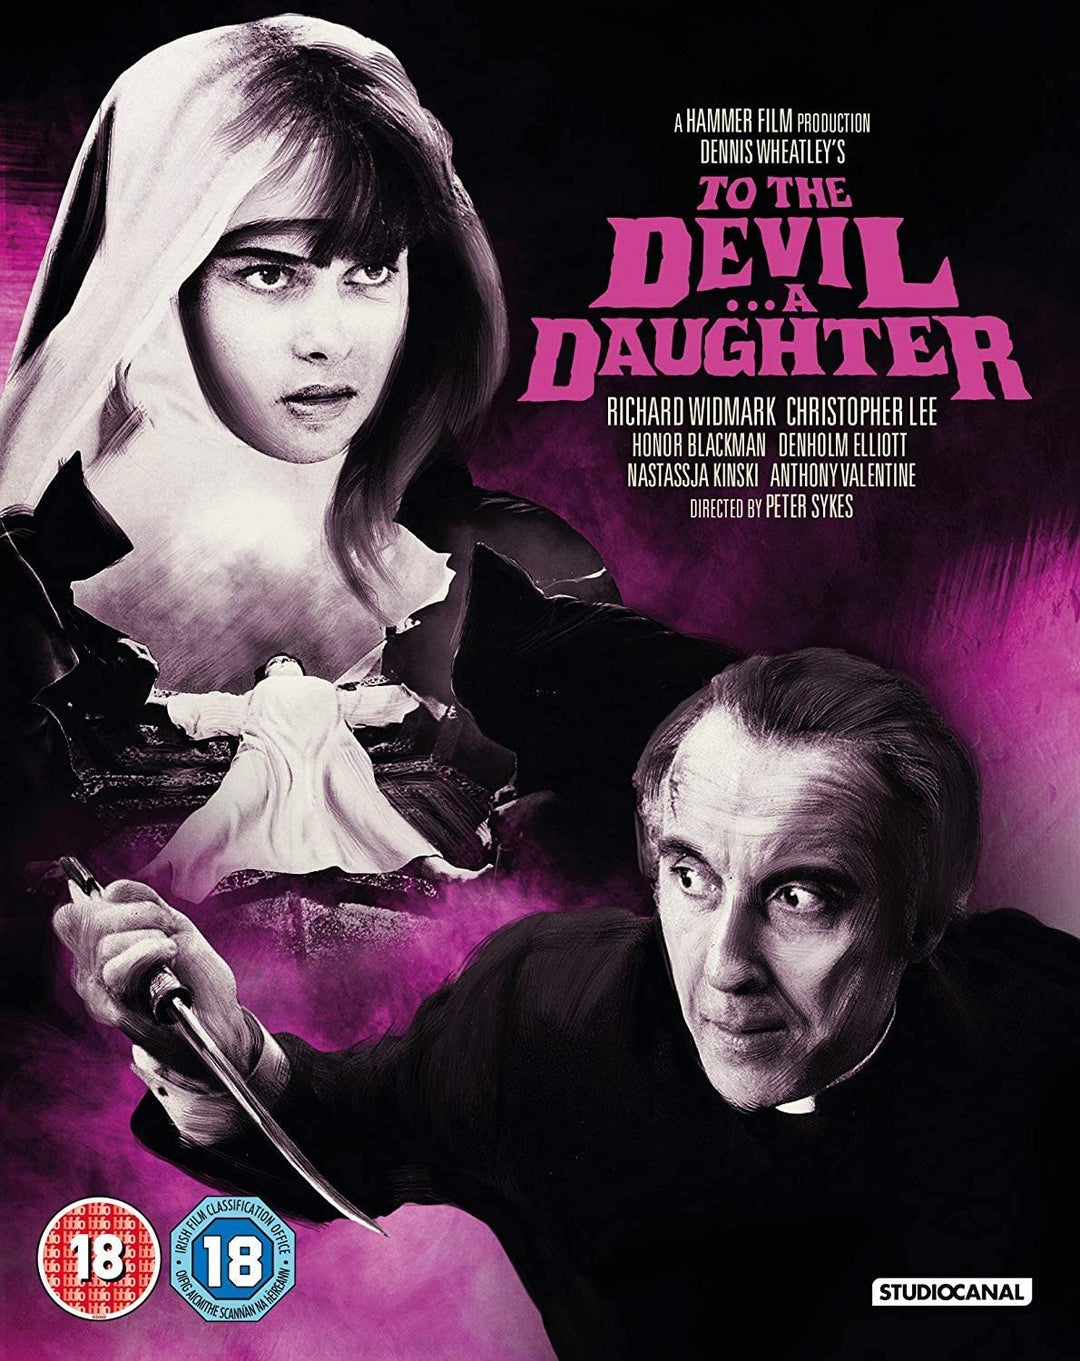 To The Devil A Daughter – Horror/Supernatural [Blu-ray]